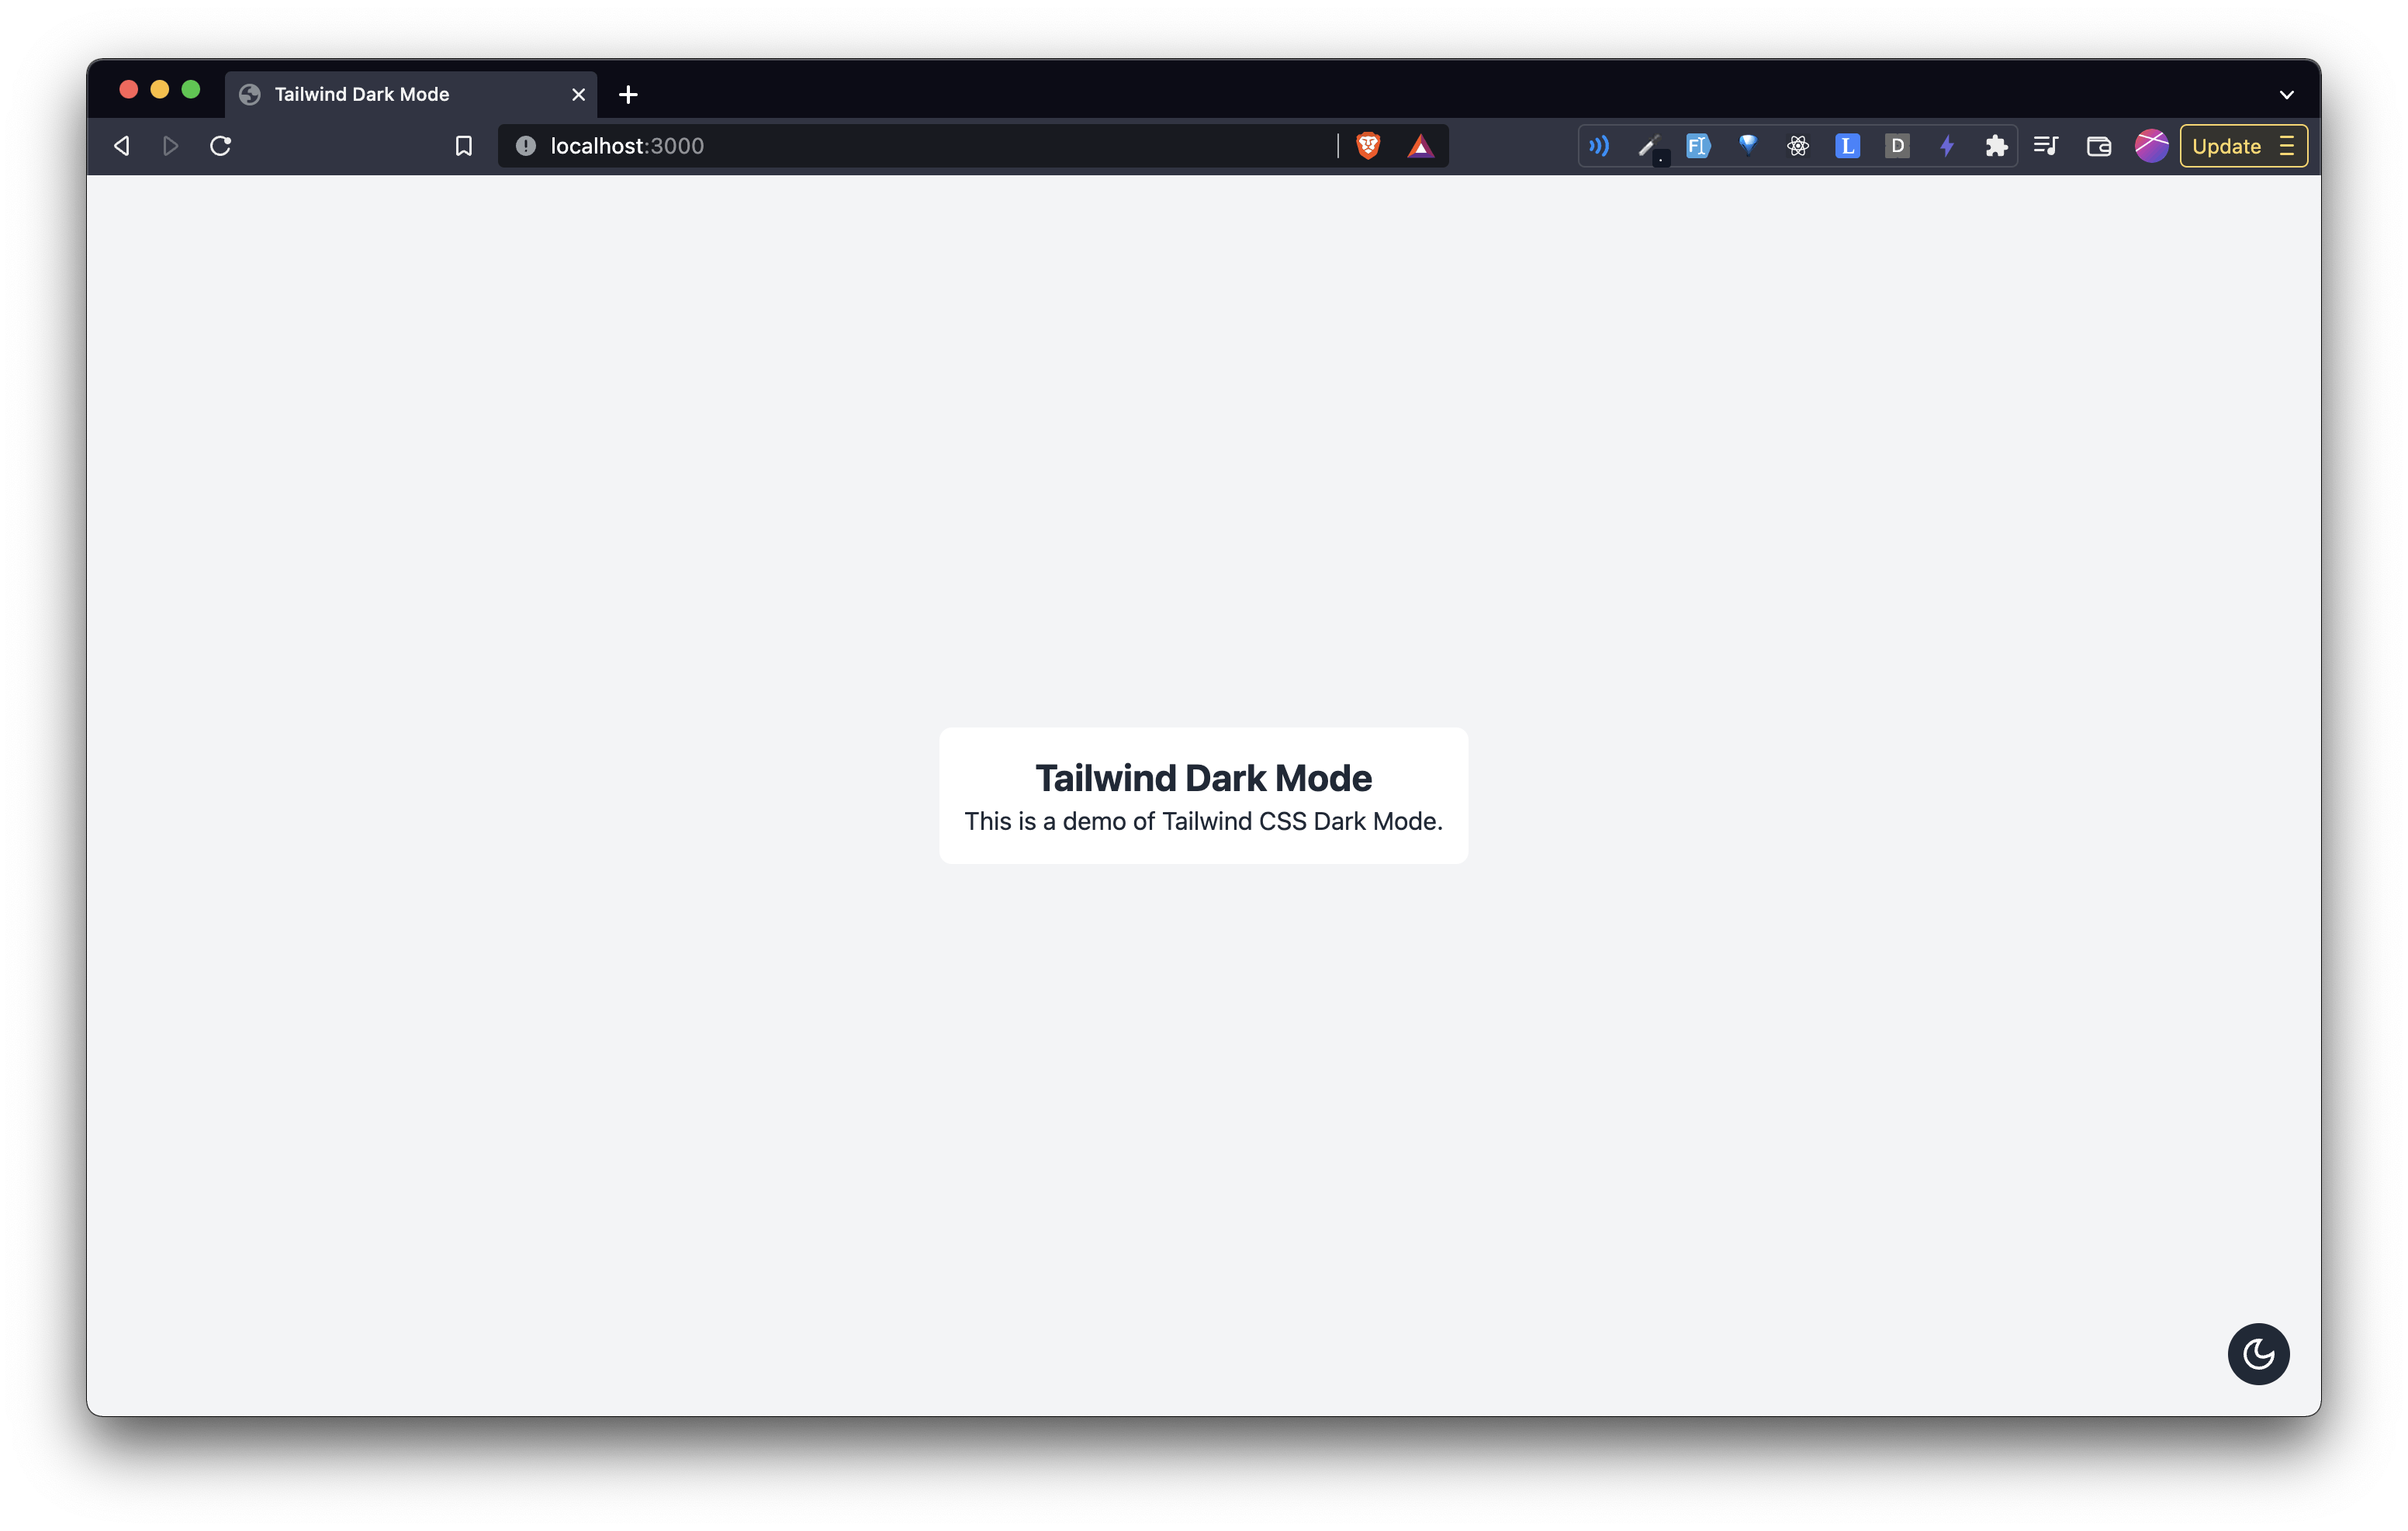 How to implement dark mode using TailwindCSS?